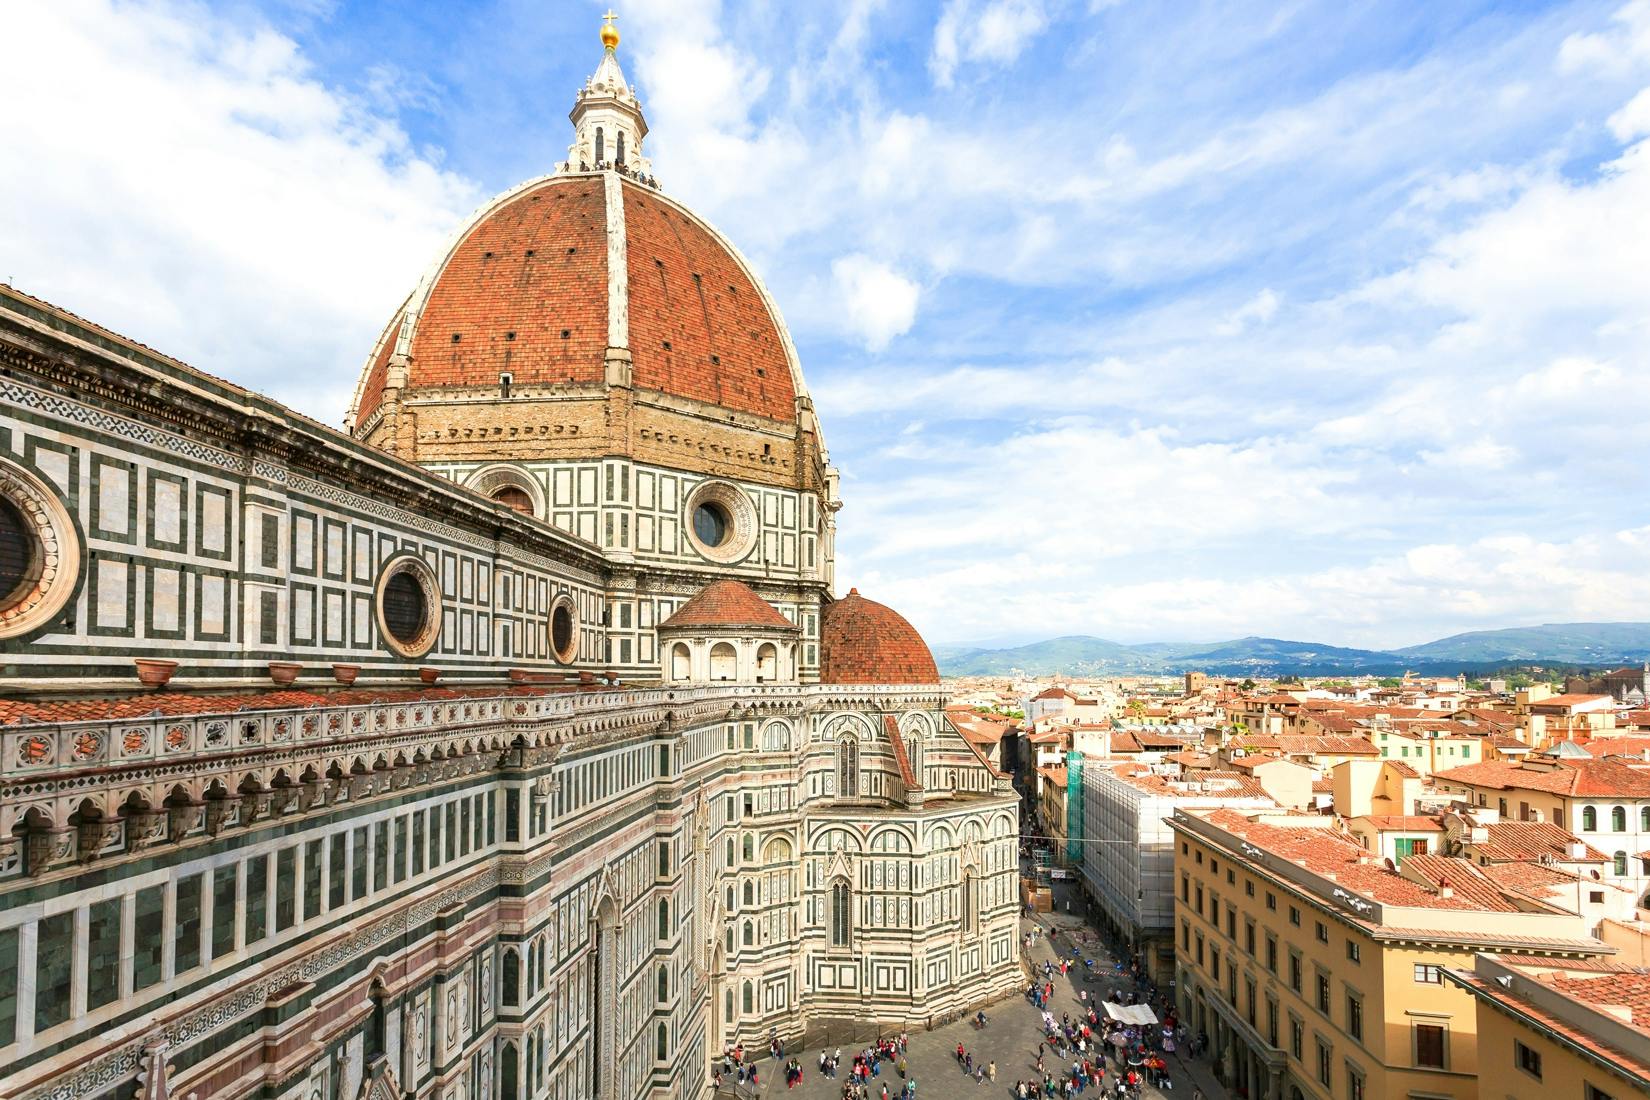 From Rome to Florence 1-day tour by train with pickup and Uffizi visit